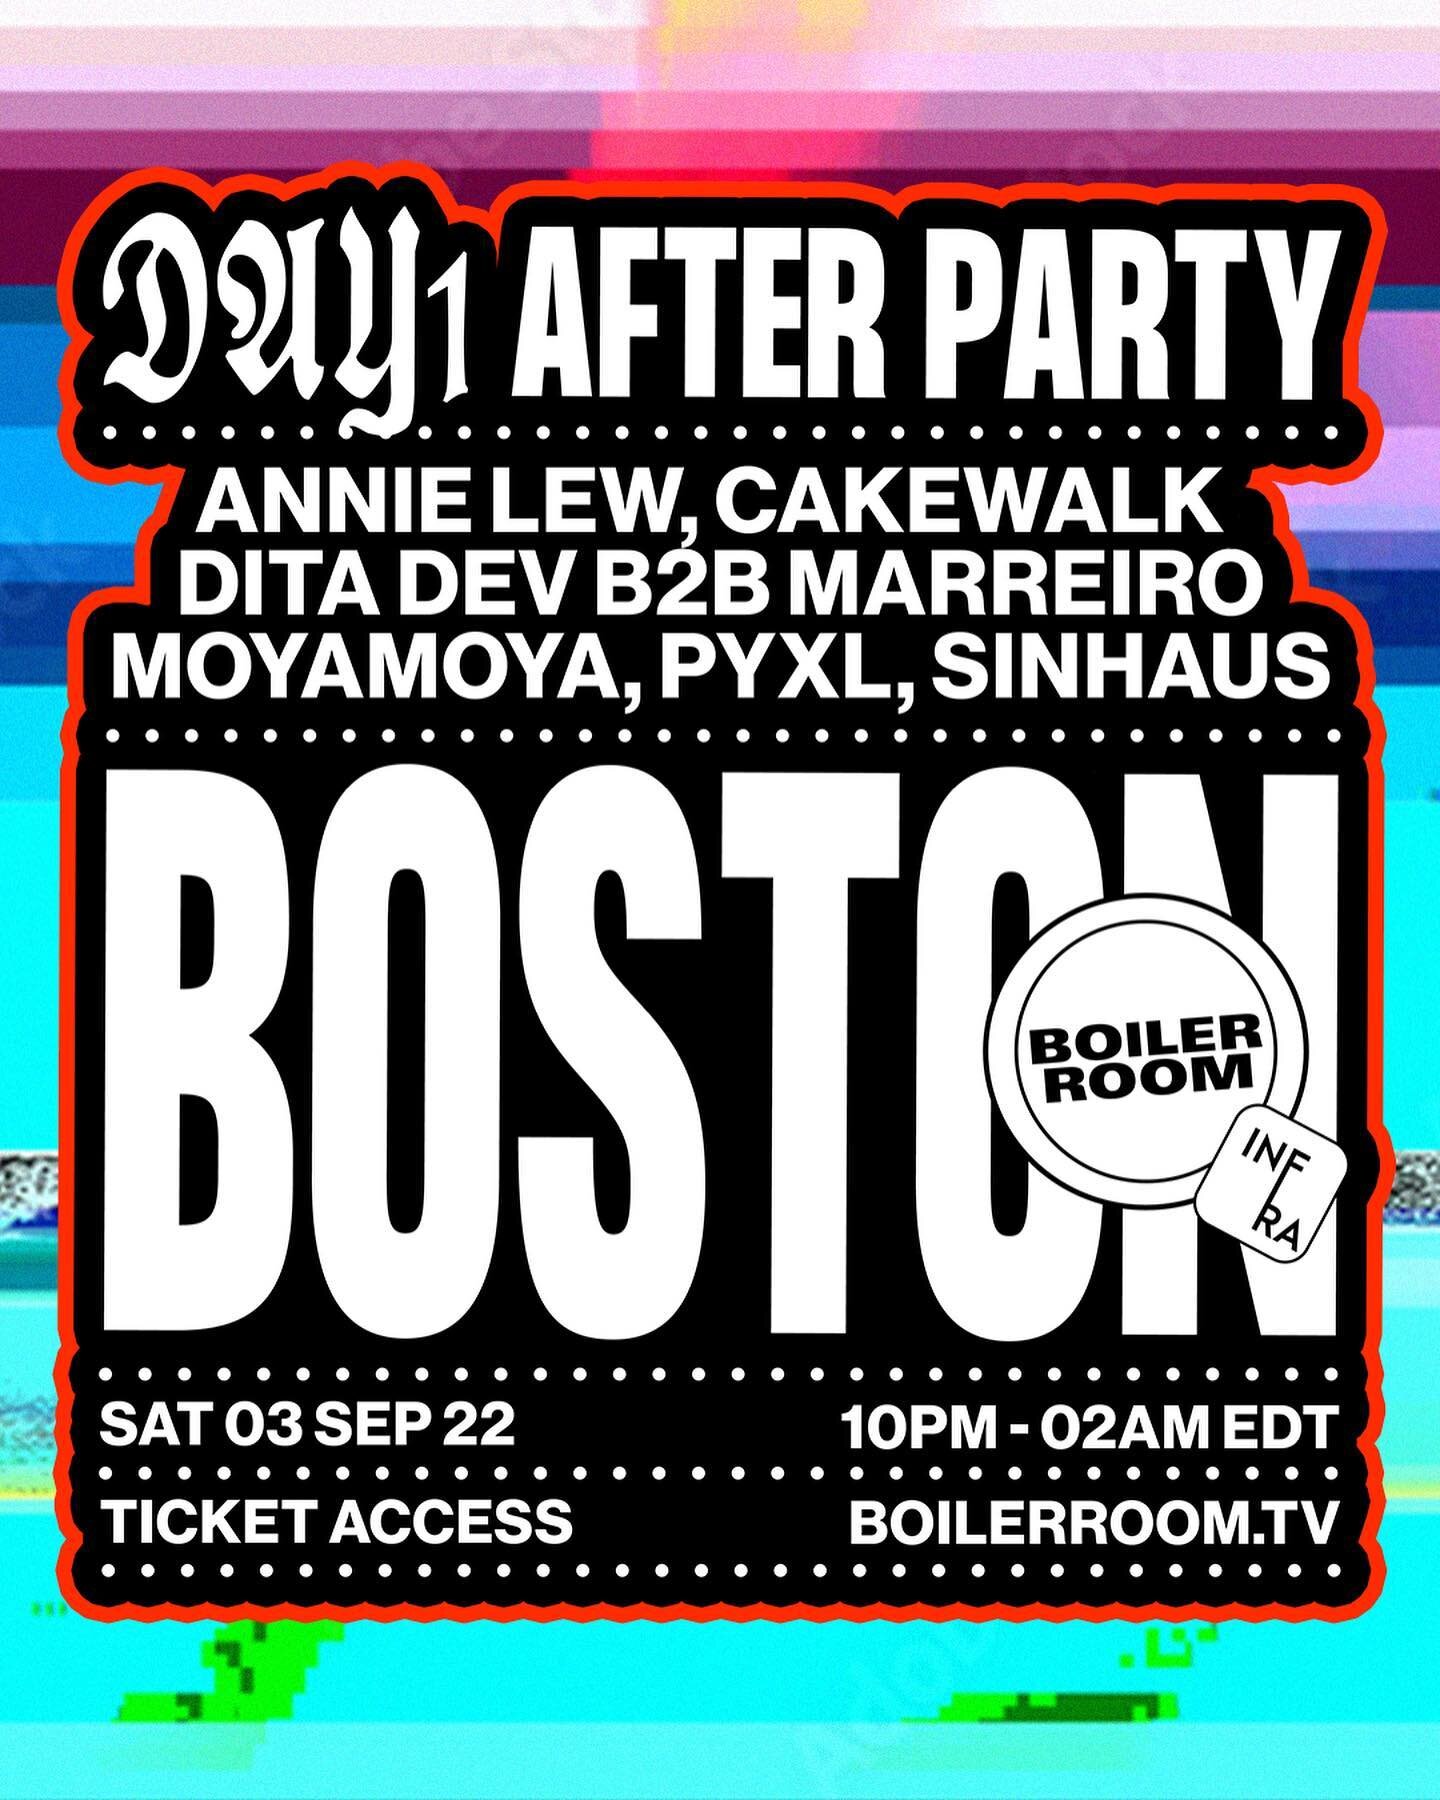 //Infra x Boiler Room
Special Guests All Night

Line-up announcement 👽

We are excited and honored to be a part of this Labor Day celebration. Get your tickets before it&rsquo;s too late, you don&rsquo;t want to miss this special long weekend in Bos